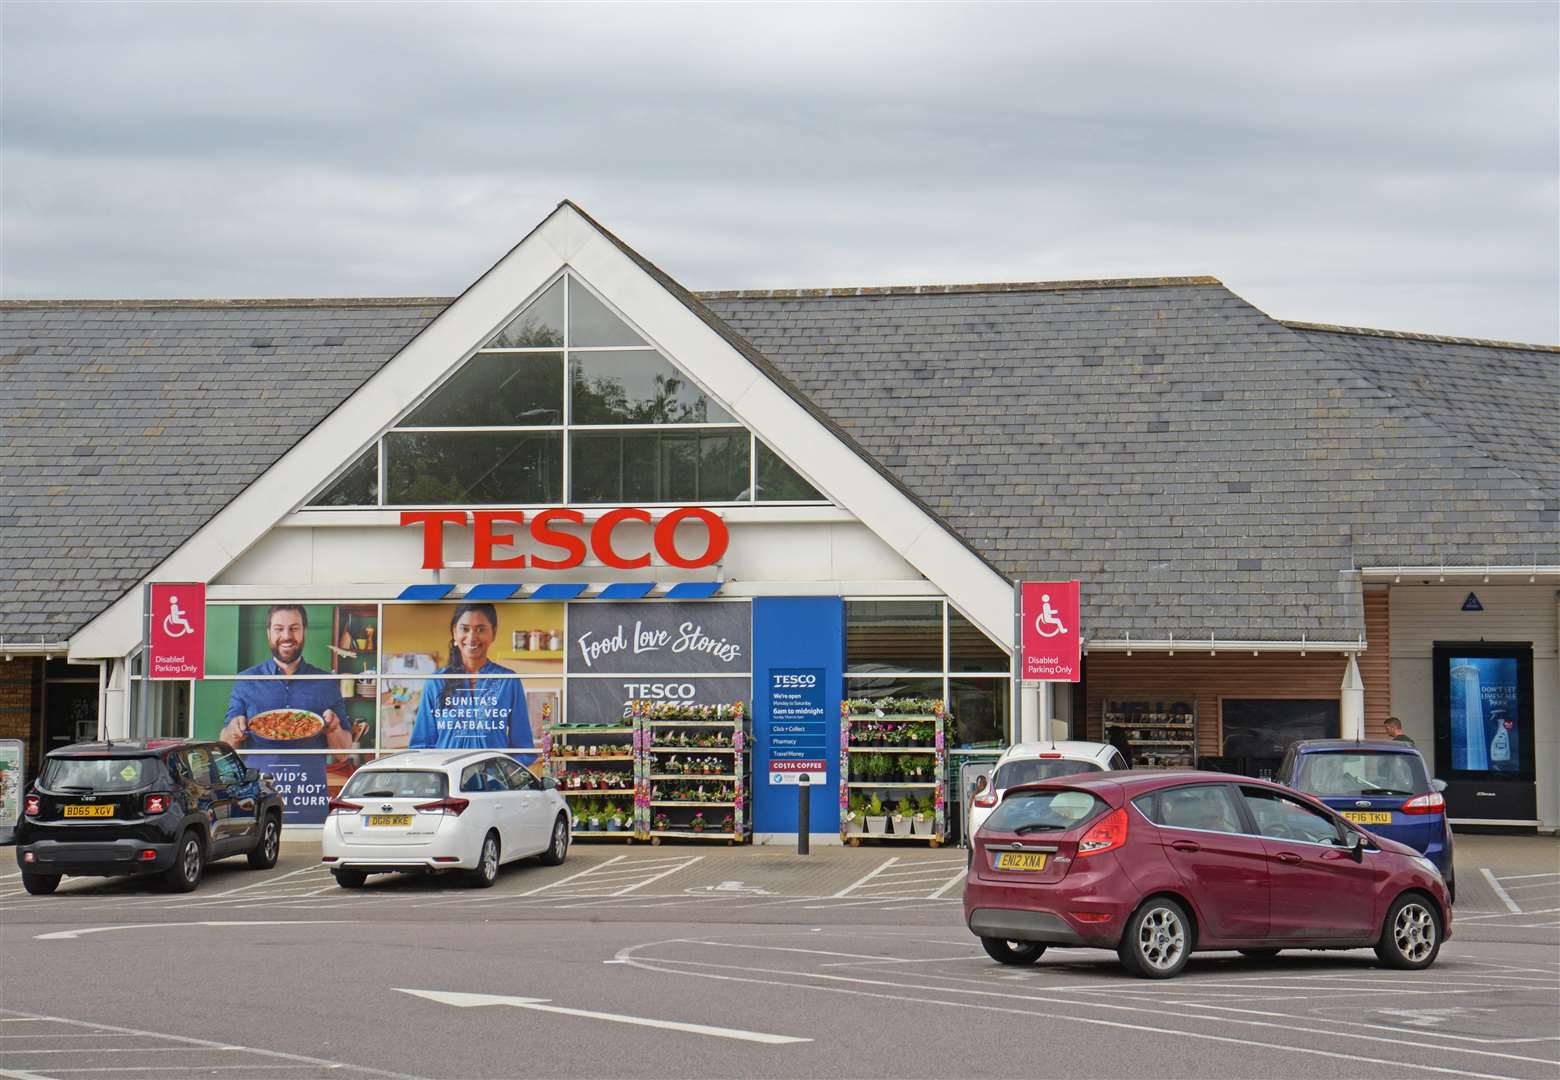 Tesco have given general opening hours but say it's best to check on the company website for your specific store